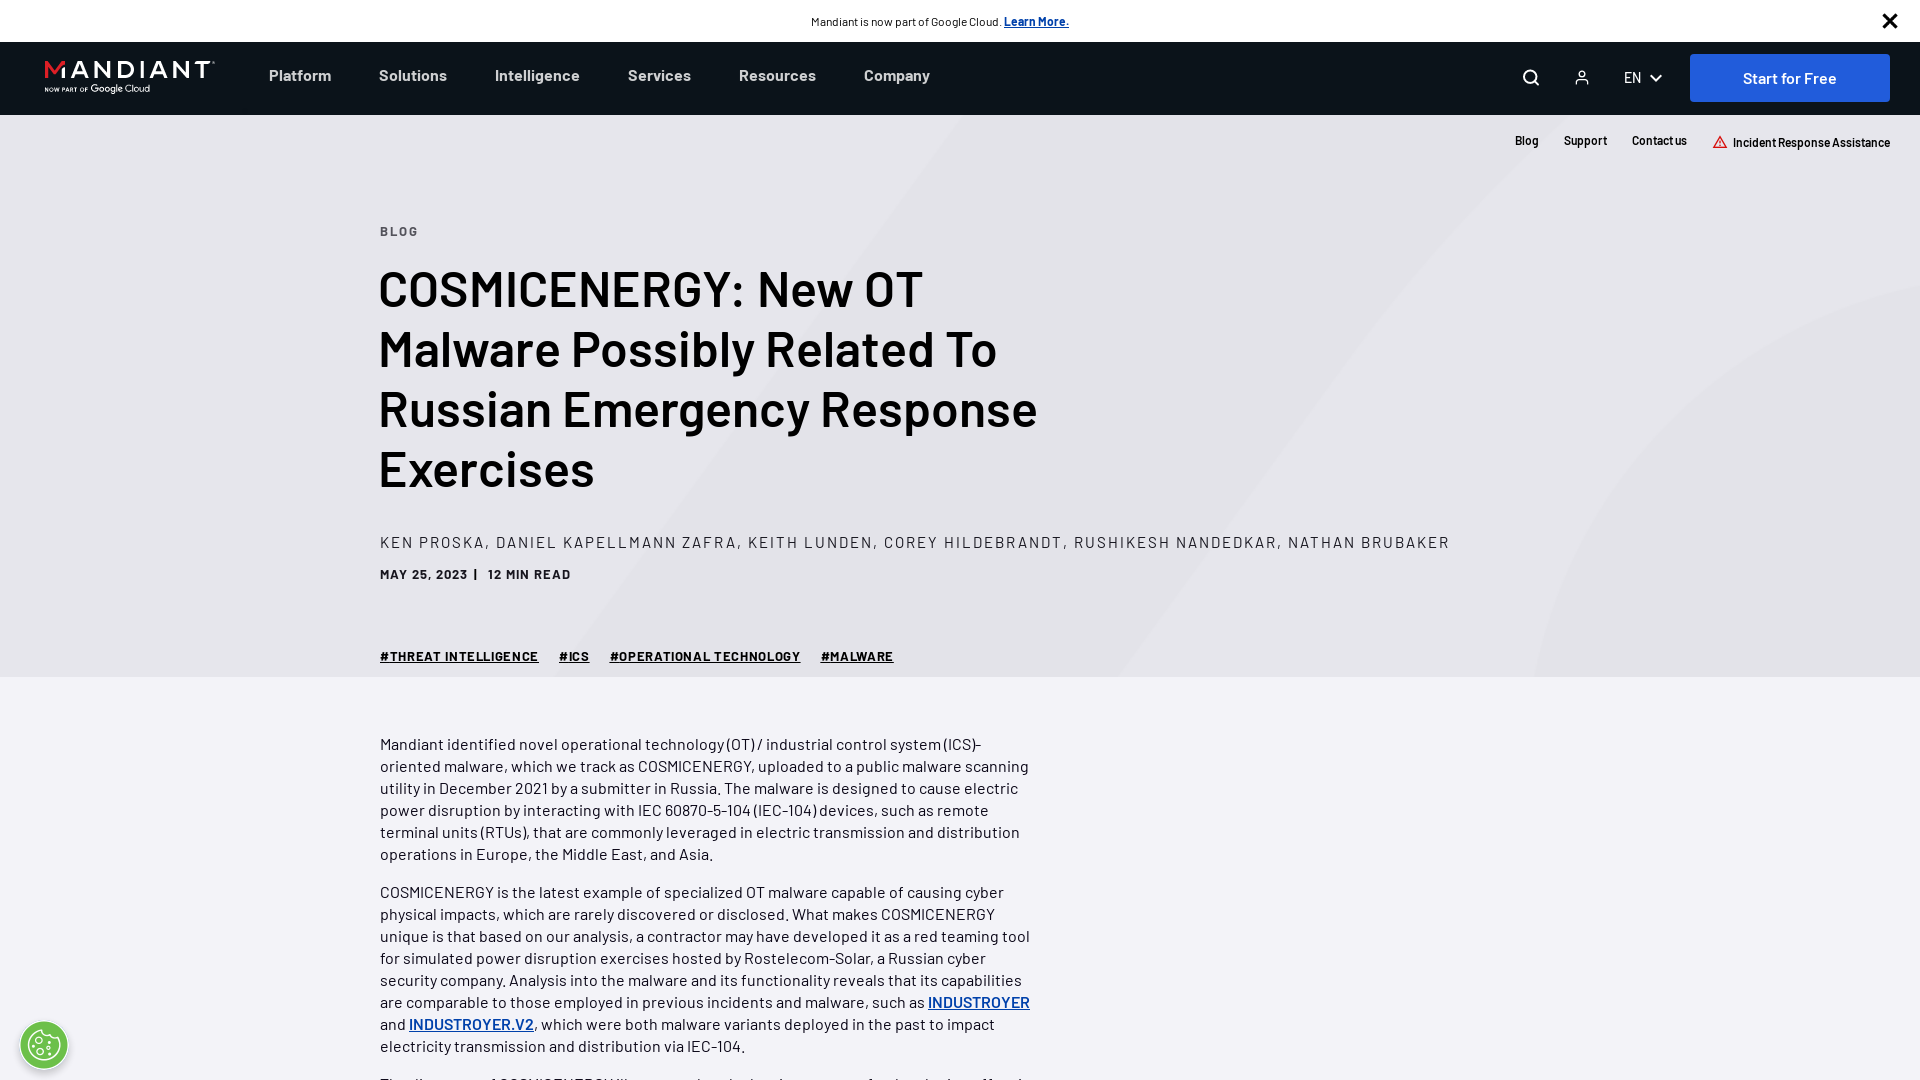 COSMICENERGY: New OT Malware Possibly Related To Russian Emergency Response Exercises | Mandiant